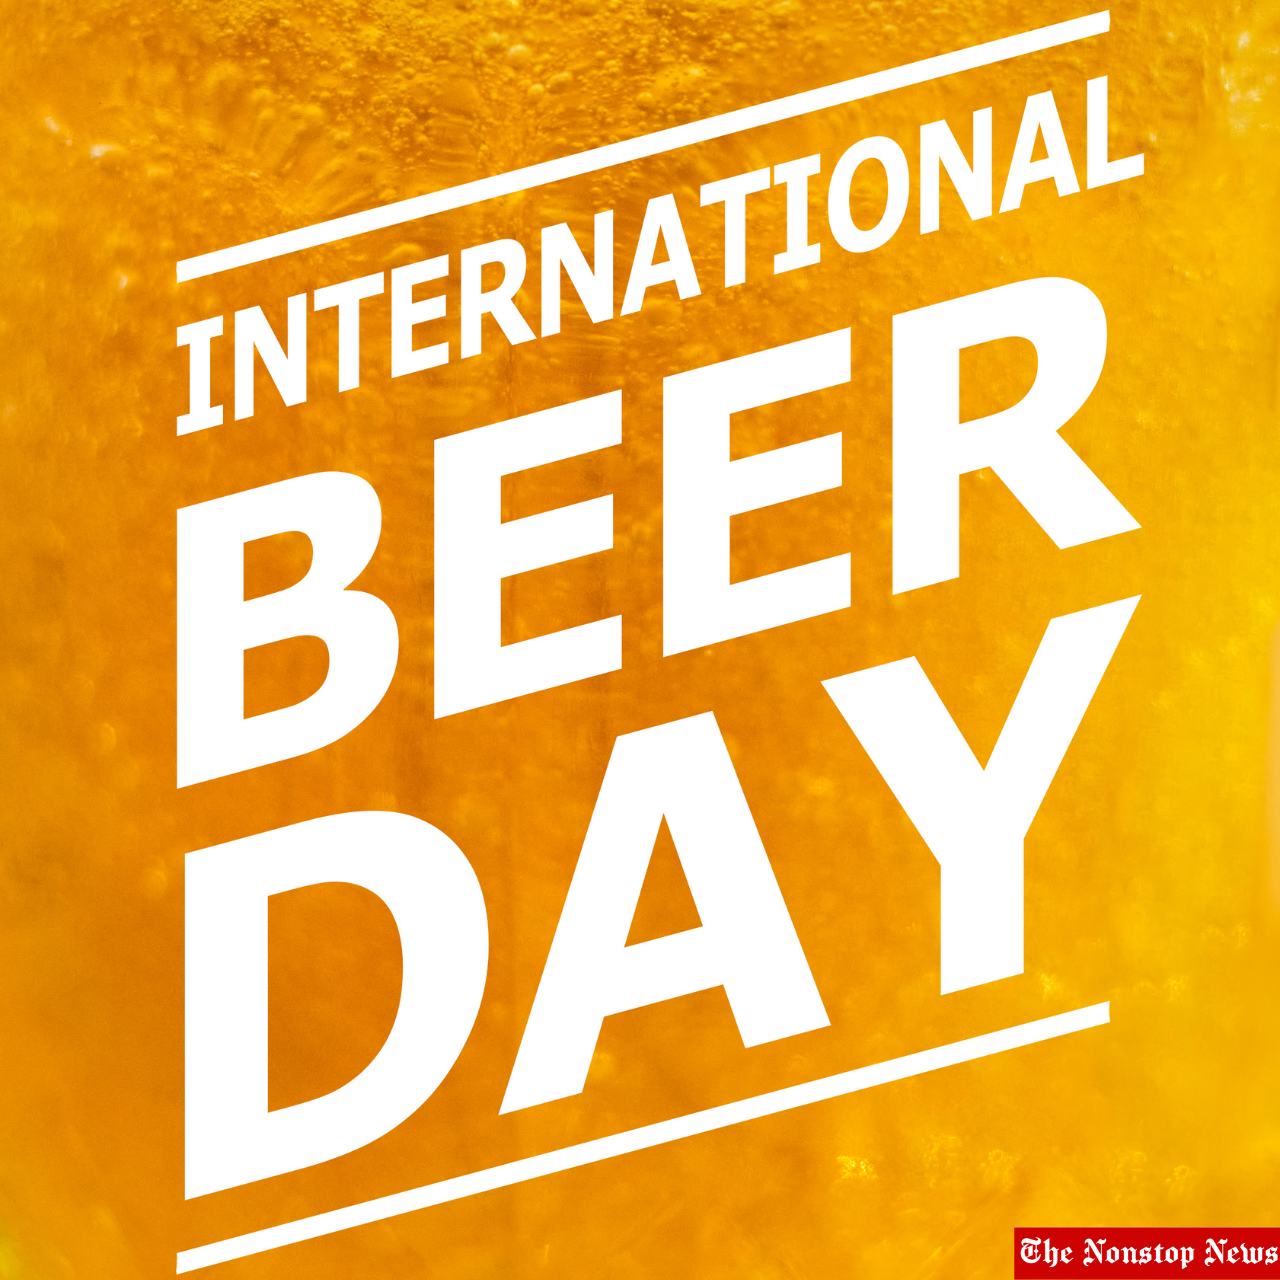 International Beer Day 2022: Quotes, Images, Wishes, Instagram Captions for social media